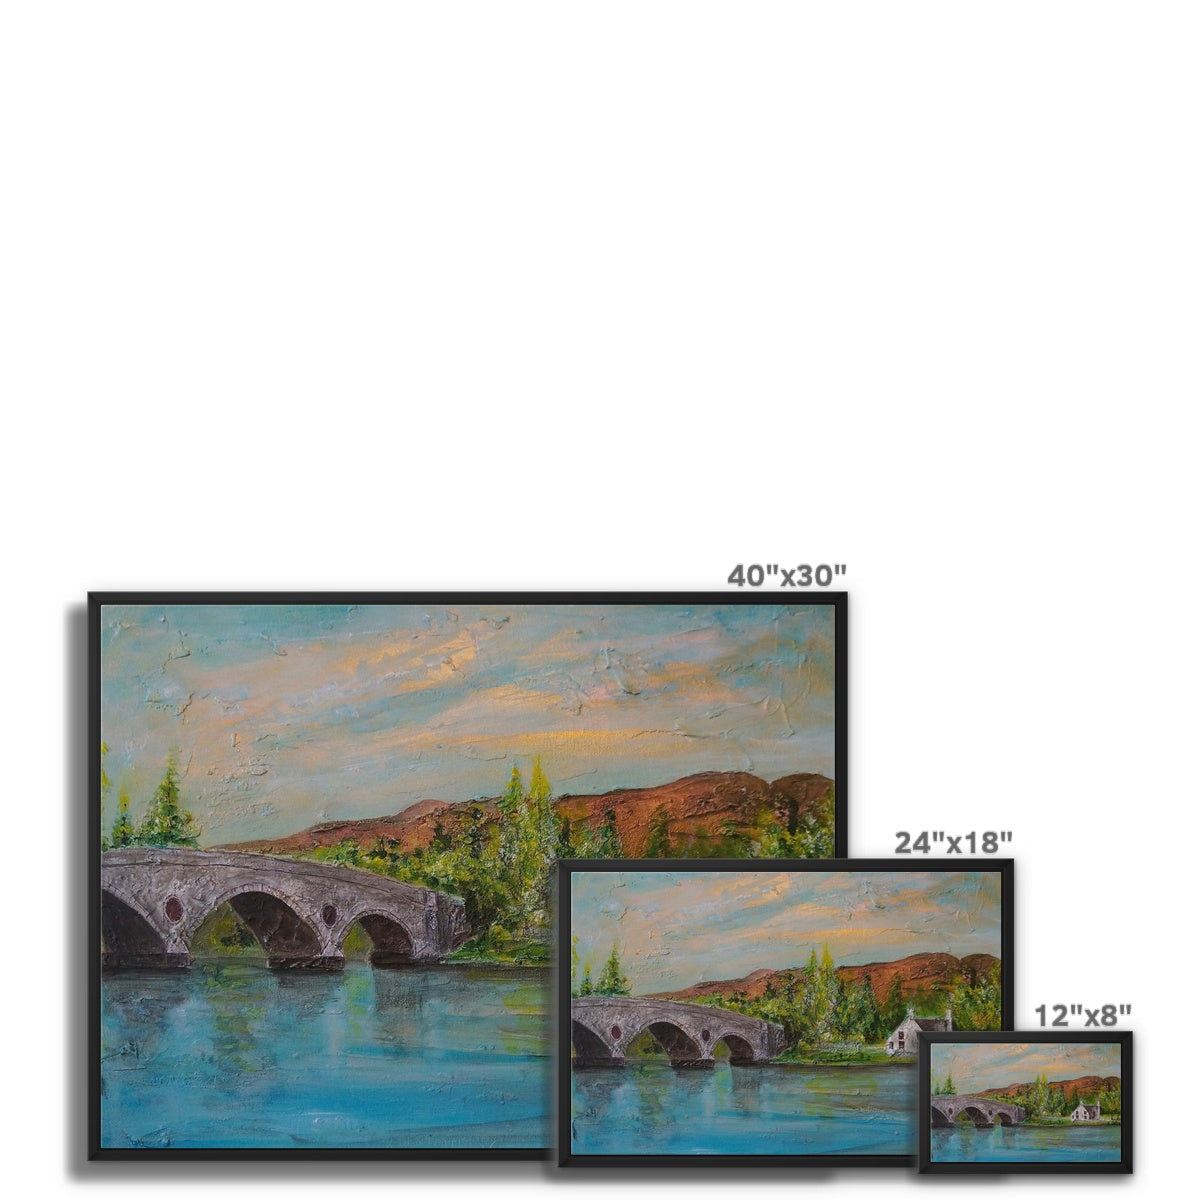 Kenmore Bridge ii Painting | Framed Canvas From Scotland-Floating Framed Canvas Prints-Scottish Highlands & Lowlands Art Gallery-Paintings, Prints, Homeware, Art Gifts From Scotland By Scottish Artist Kevin Hunter